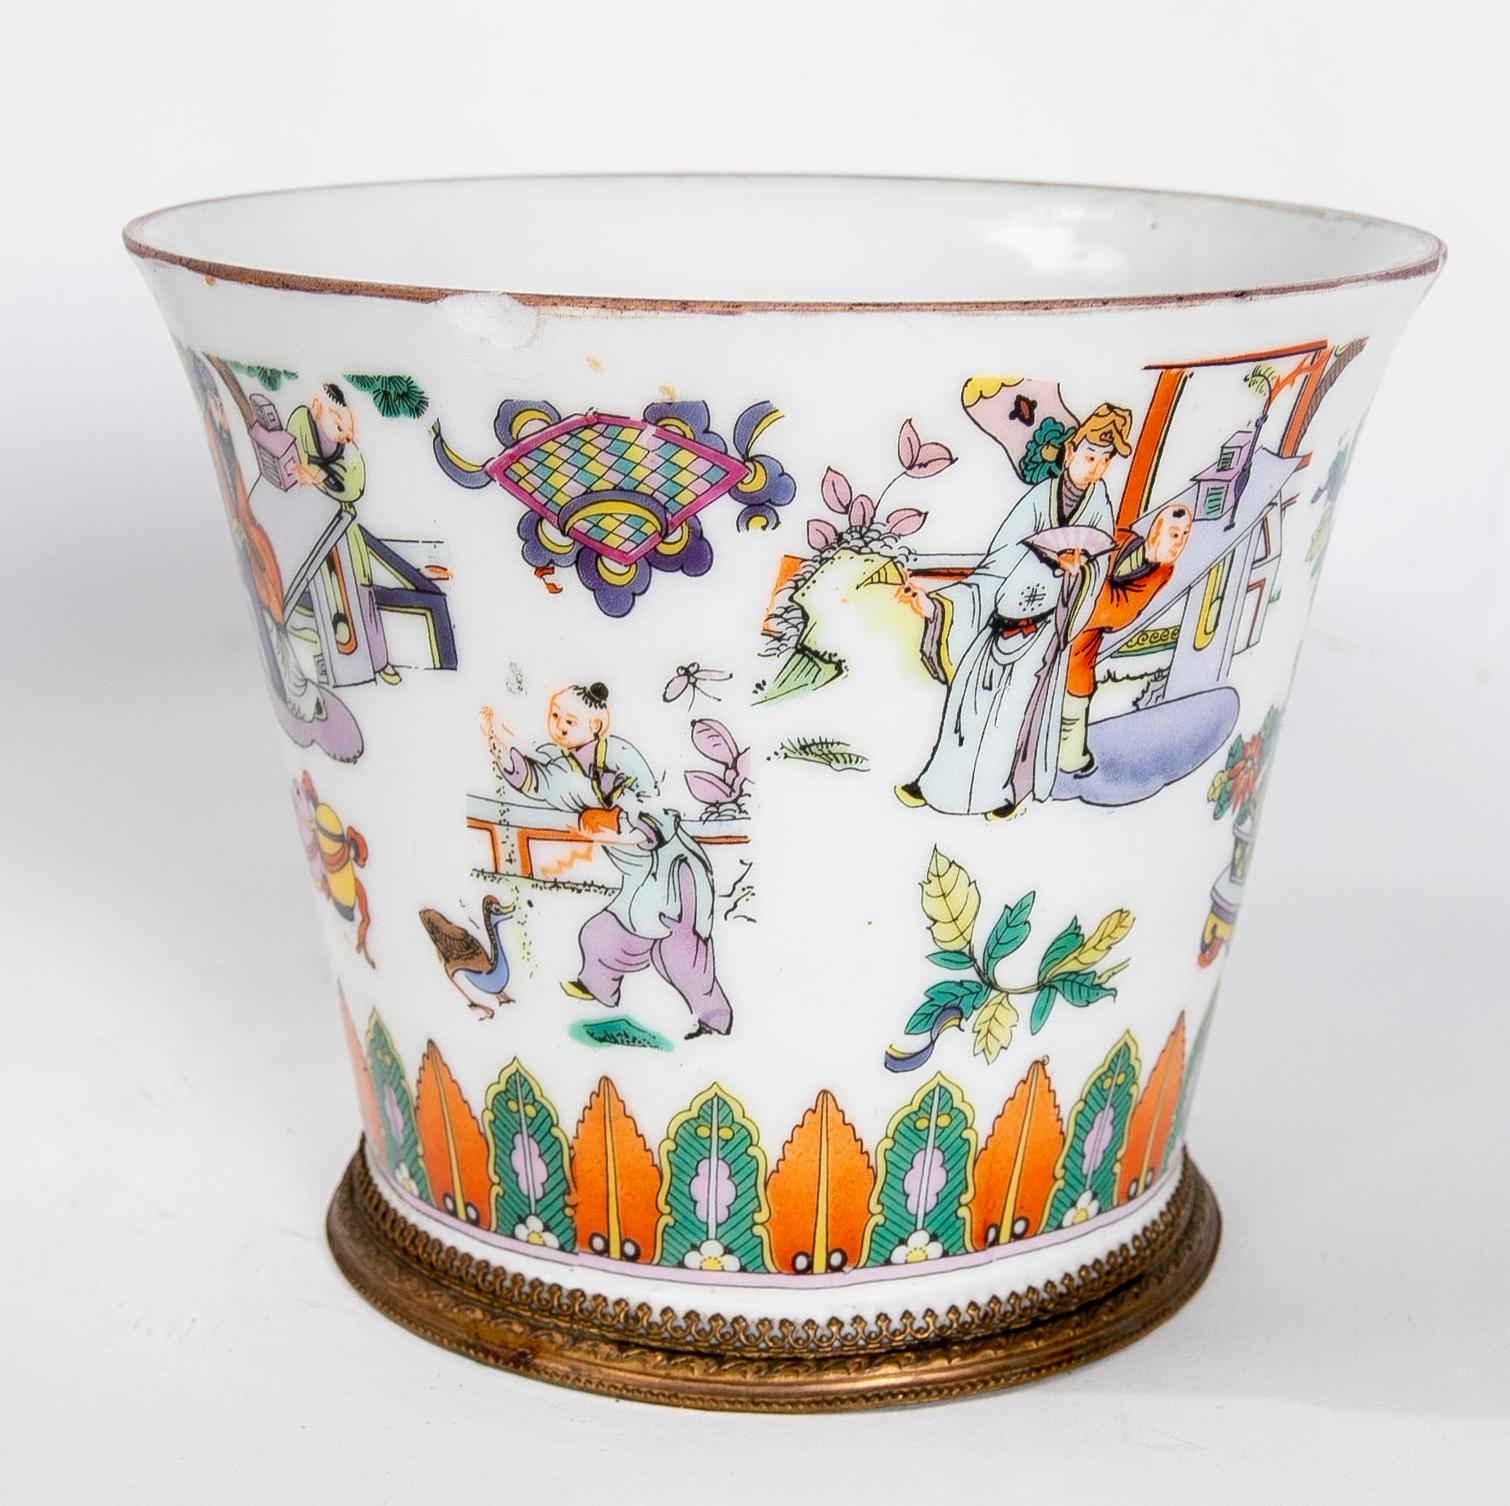 Hand-Painted 19th Century Chinese Porcelain Vase with Oriental Scenes